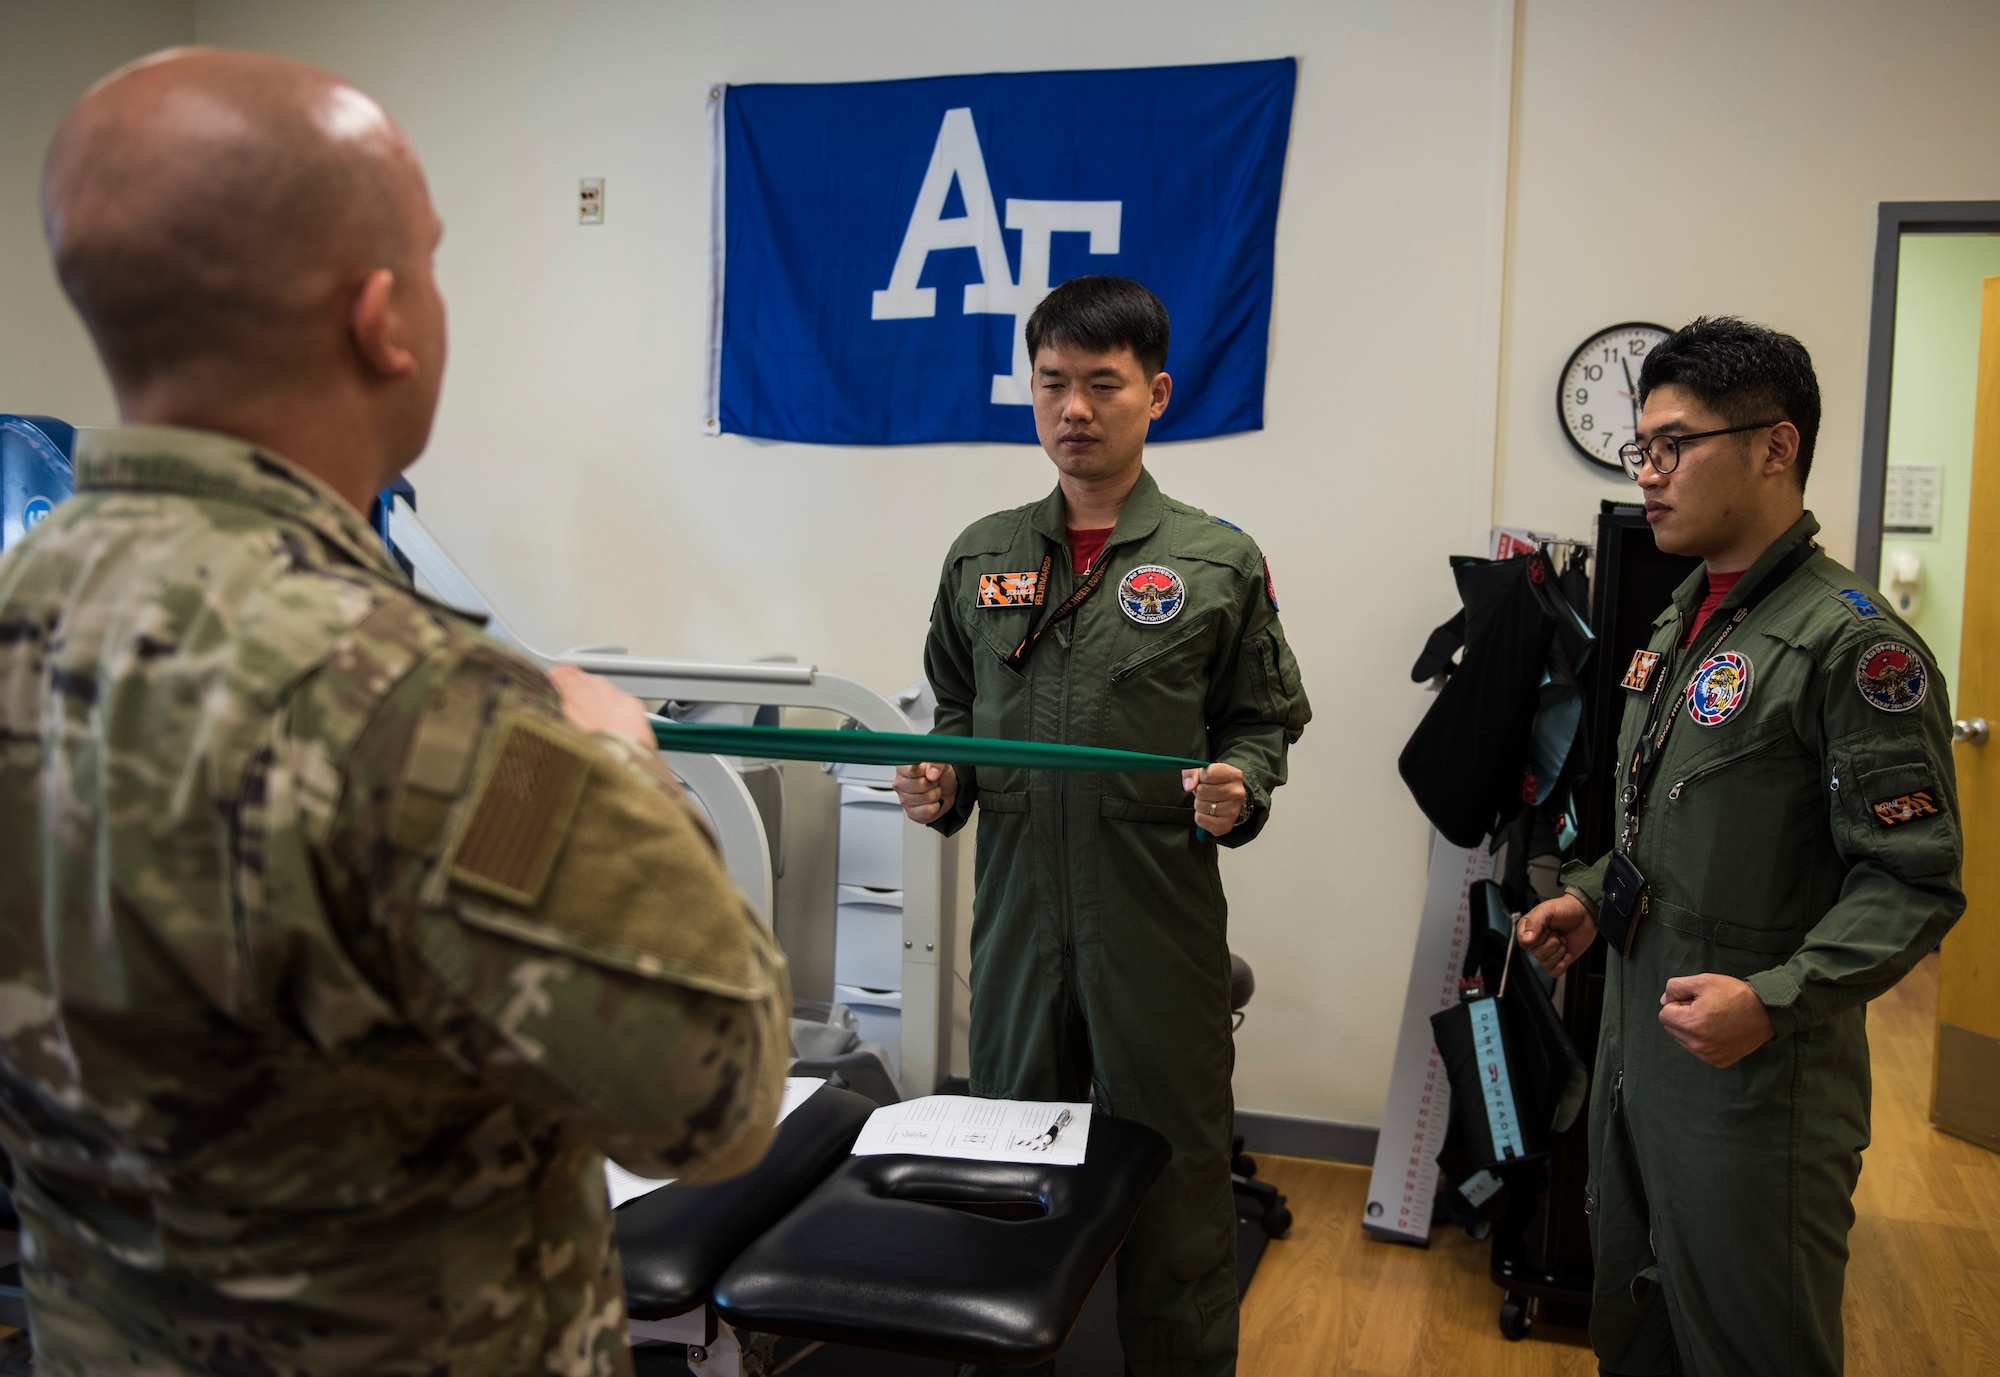 U.S. Air Force Tech. Sgt. Nicholas Ramirez, 8th Medical Operations Squadron physical therapy flight chief, teaches pilots from Republic of Korea Air Force’s 111th Fighter Squadron how to stretch their backs, during a training session at Kunsan Air Base, Republic of Korea, Aug. 9, 2019. Pilots often find themselves developing pain in different areas from regularly putting their bodies under high amounts of gravitational forces. (U.S. Air Force photo by Senior Airman Stefan Alvarez)